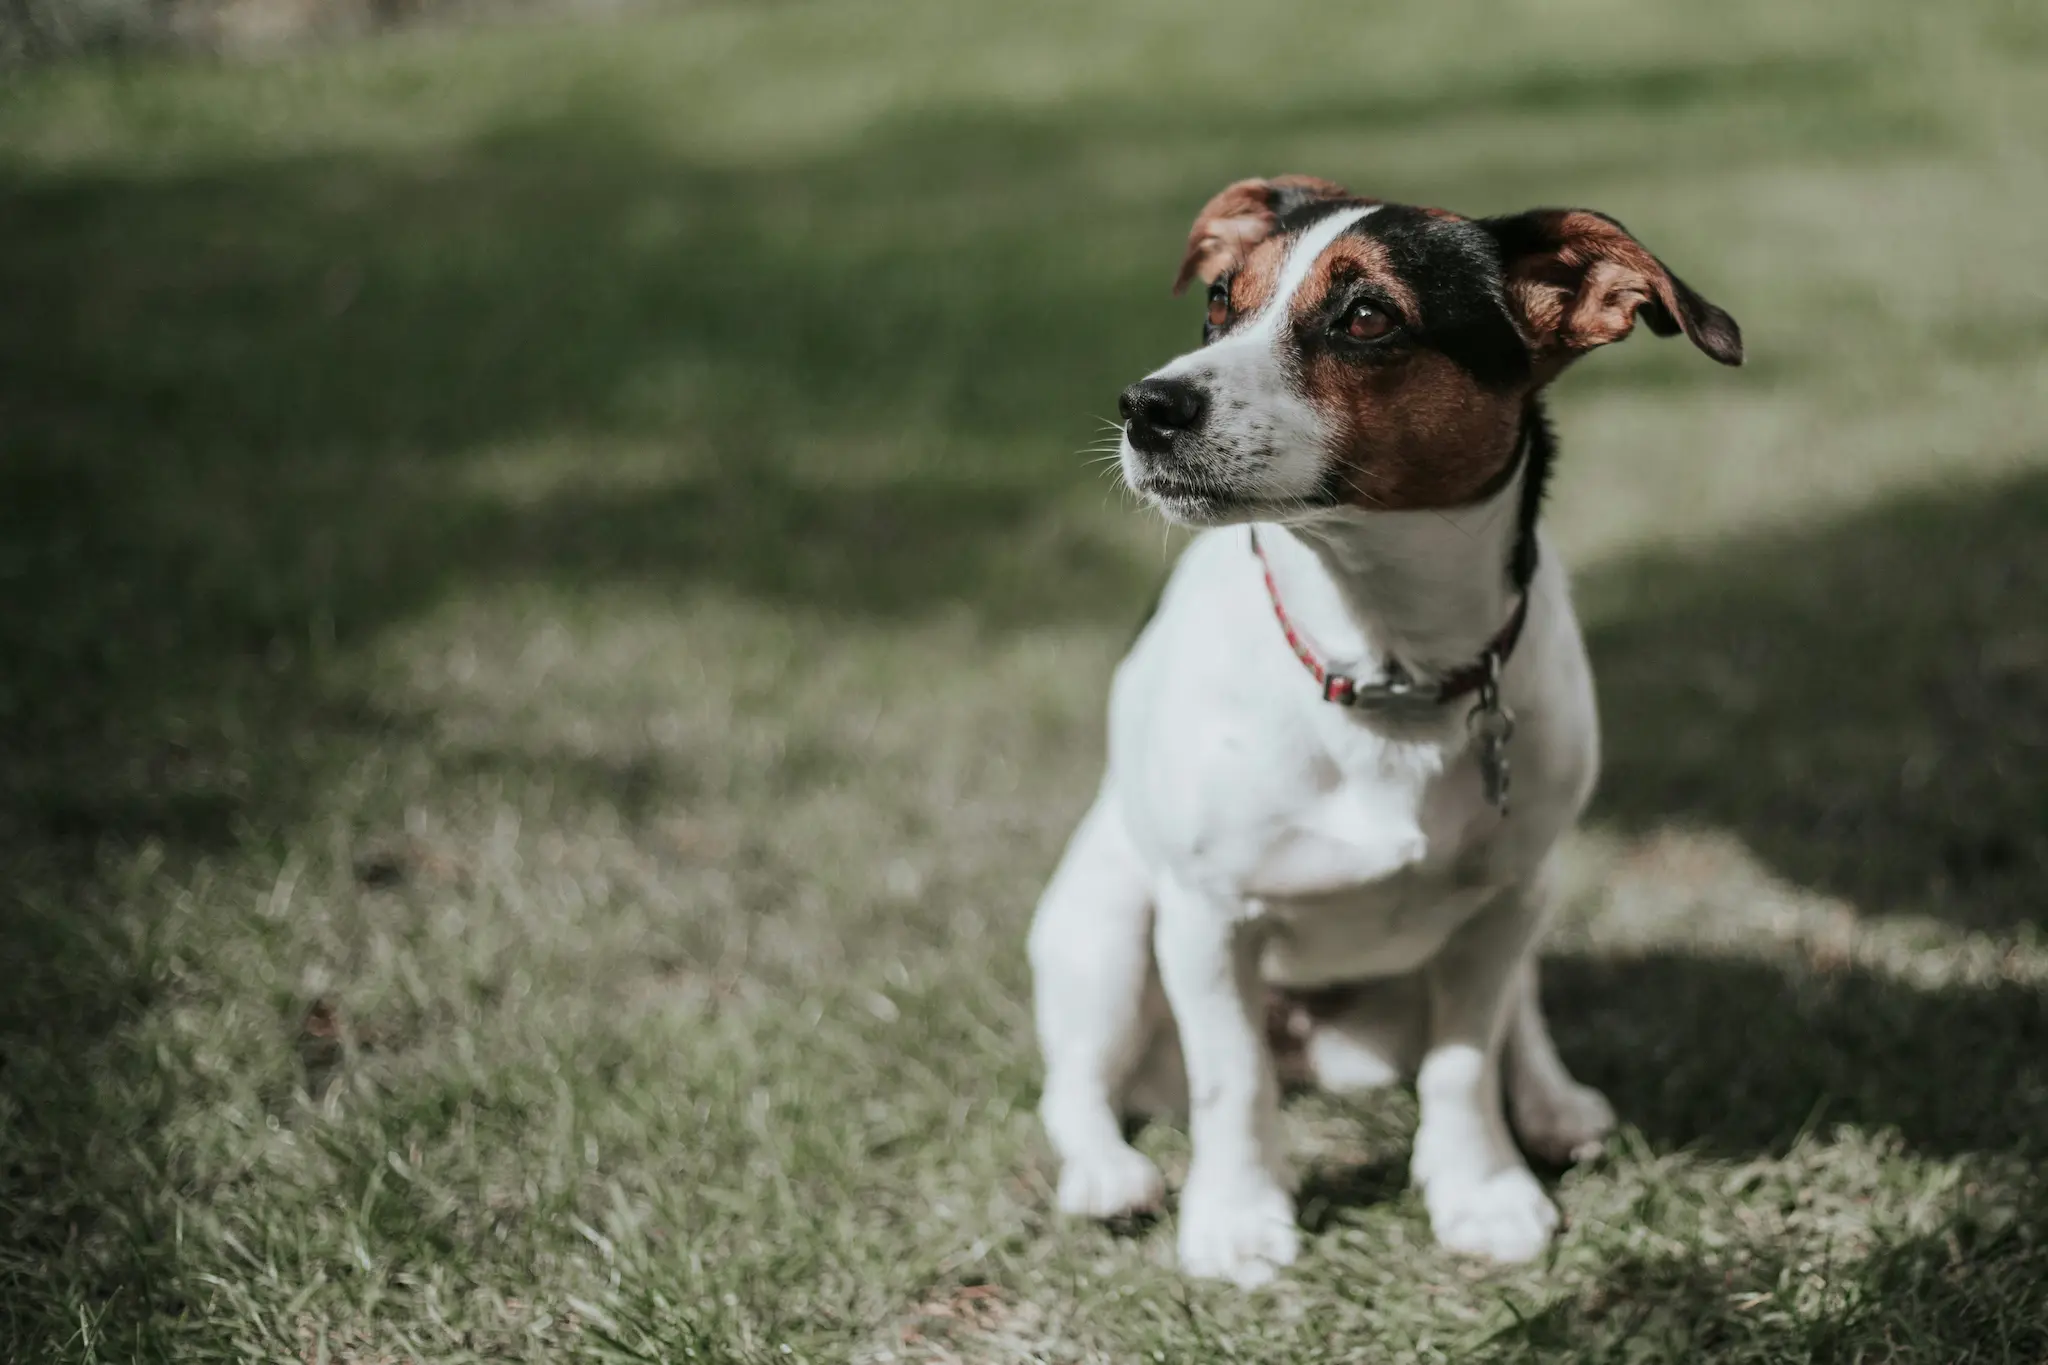 A white and brown jack russel terrier dog sitting in a green grass field with the sun shining on its face.